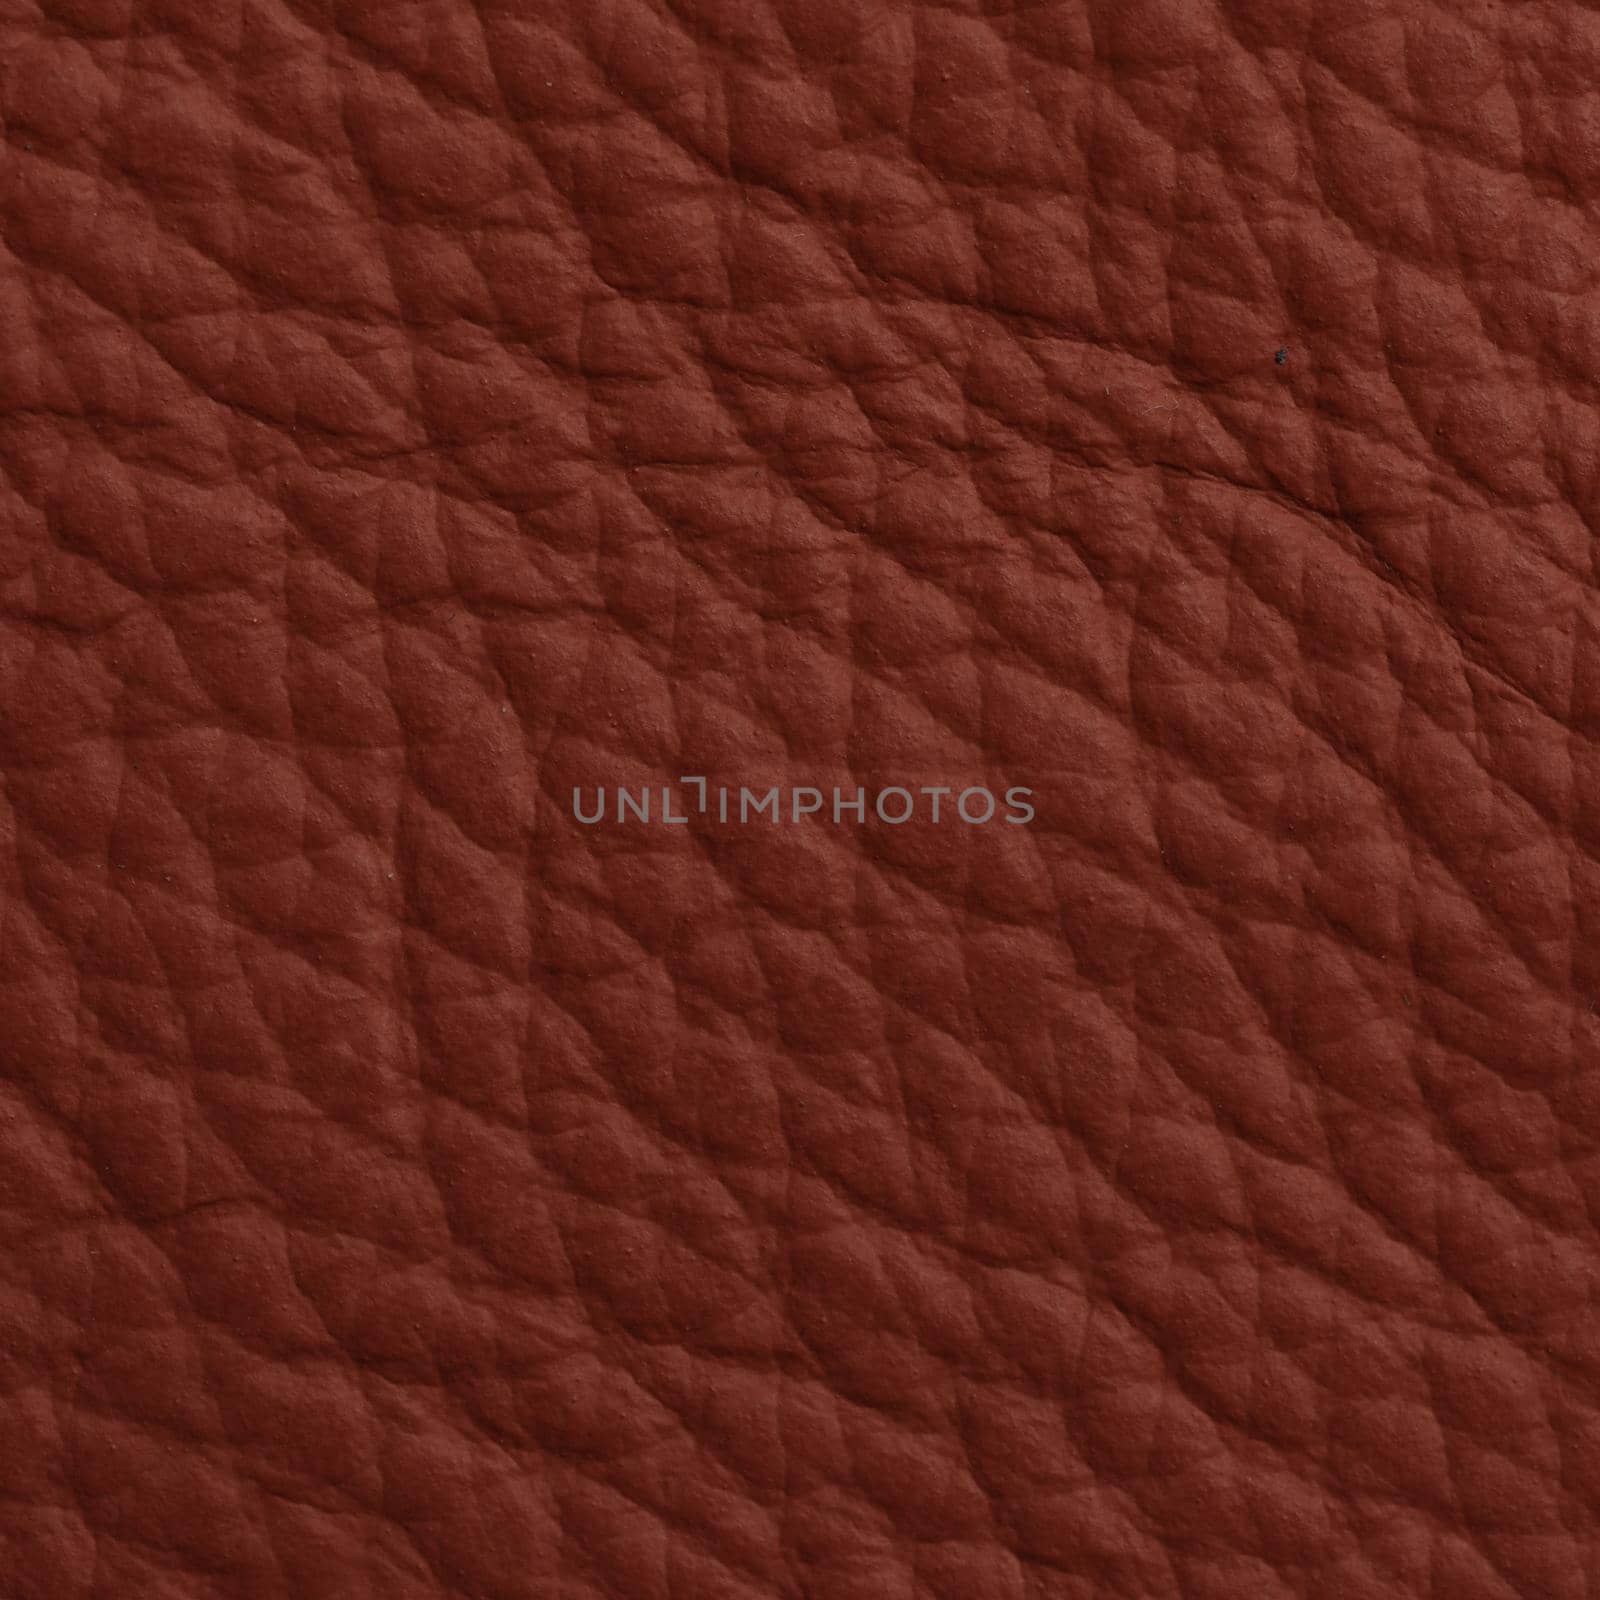 Red leather texture closeup macro shot for background